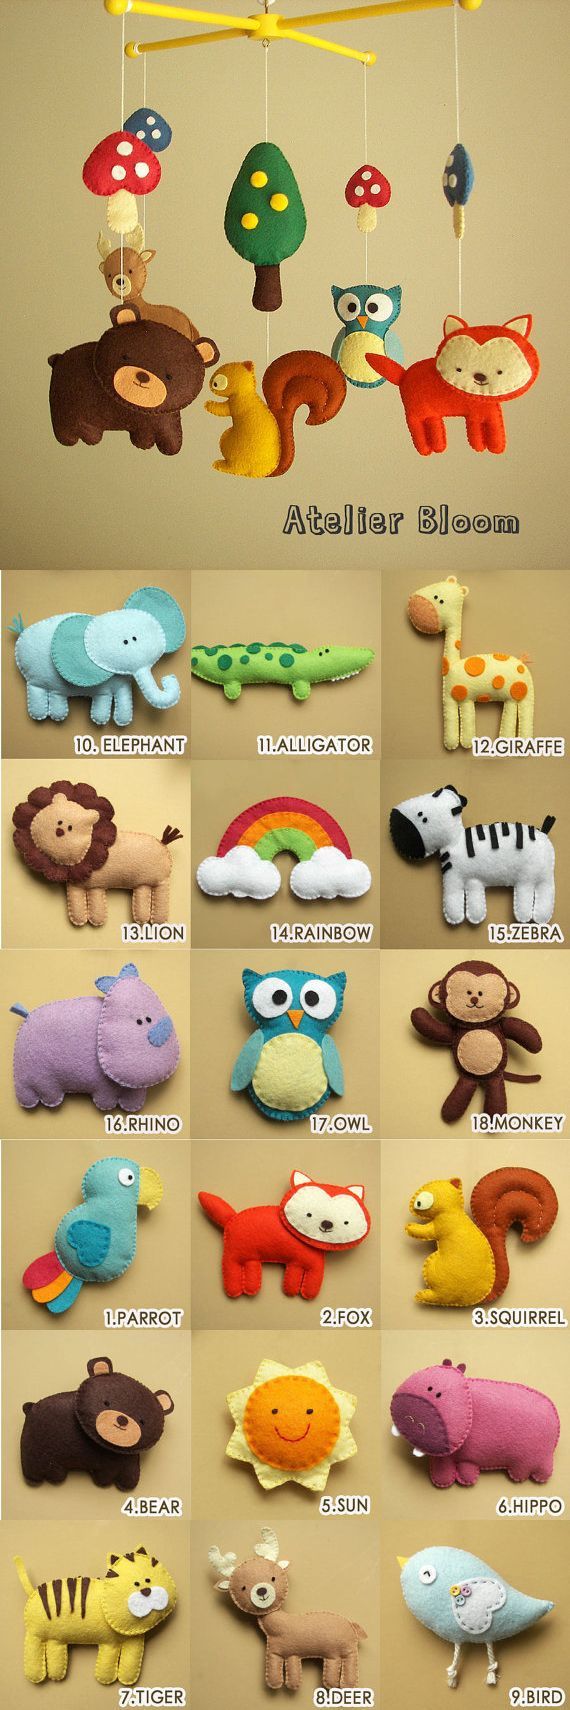 Felt Animal Inspiration, pdf pattern download seems iffy… These look like your